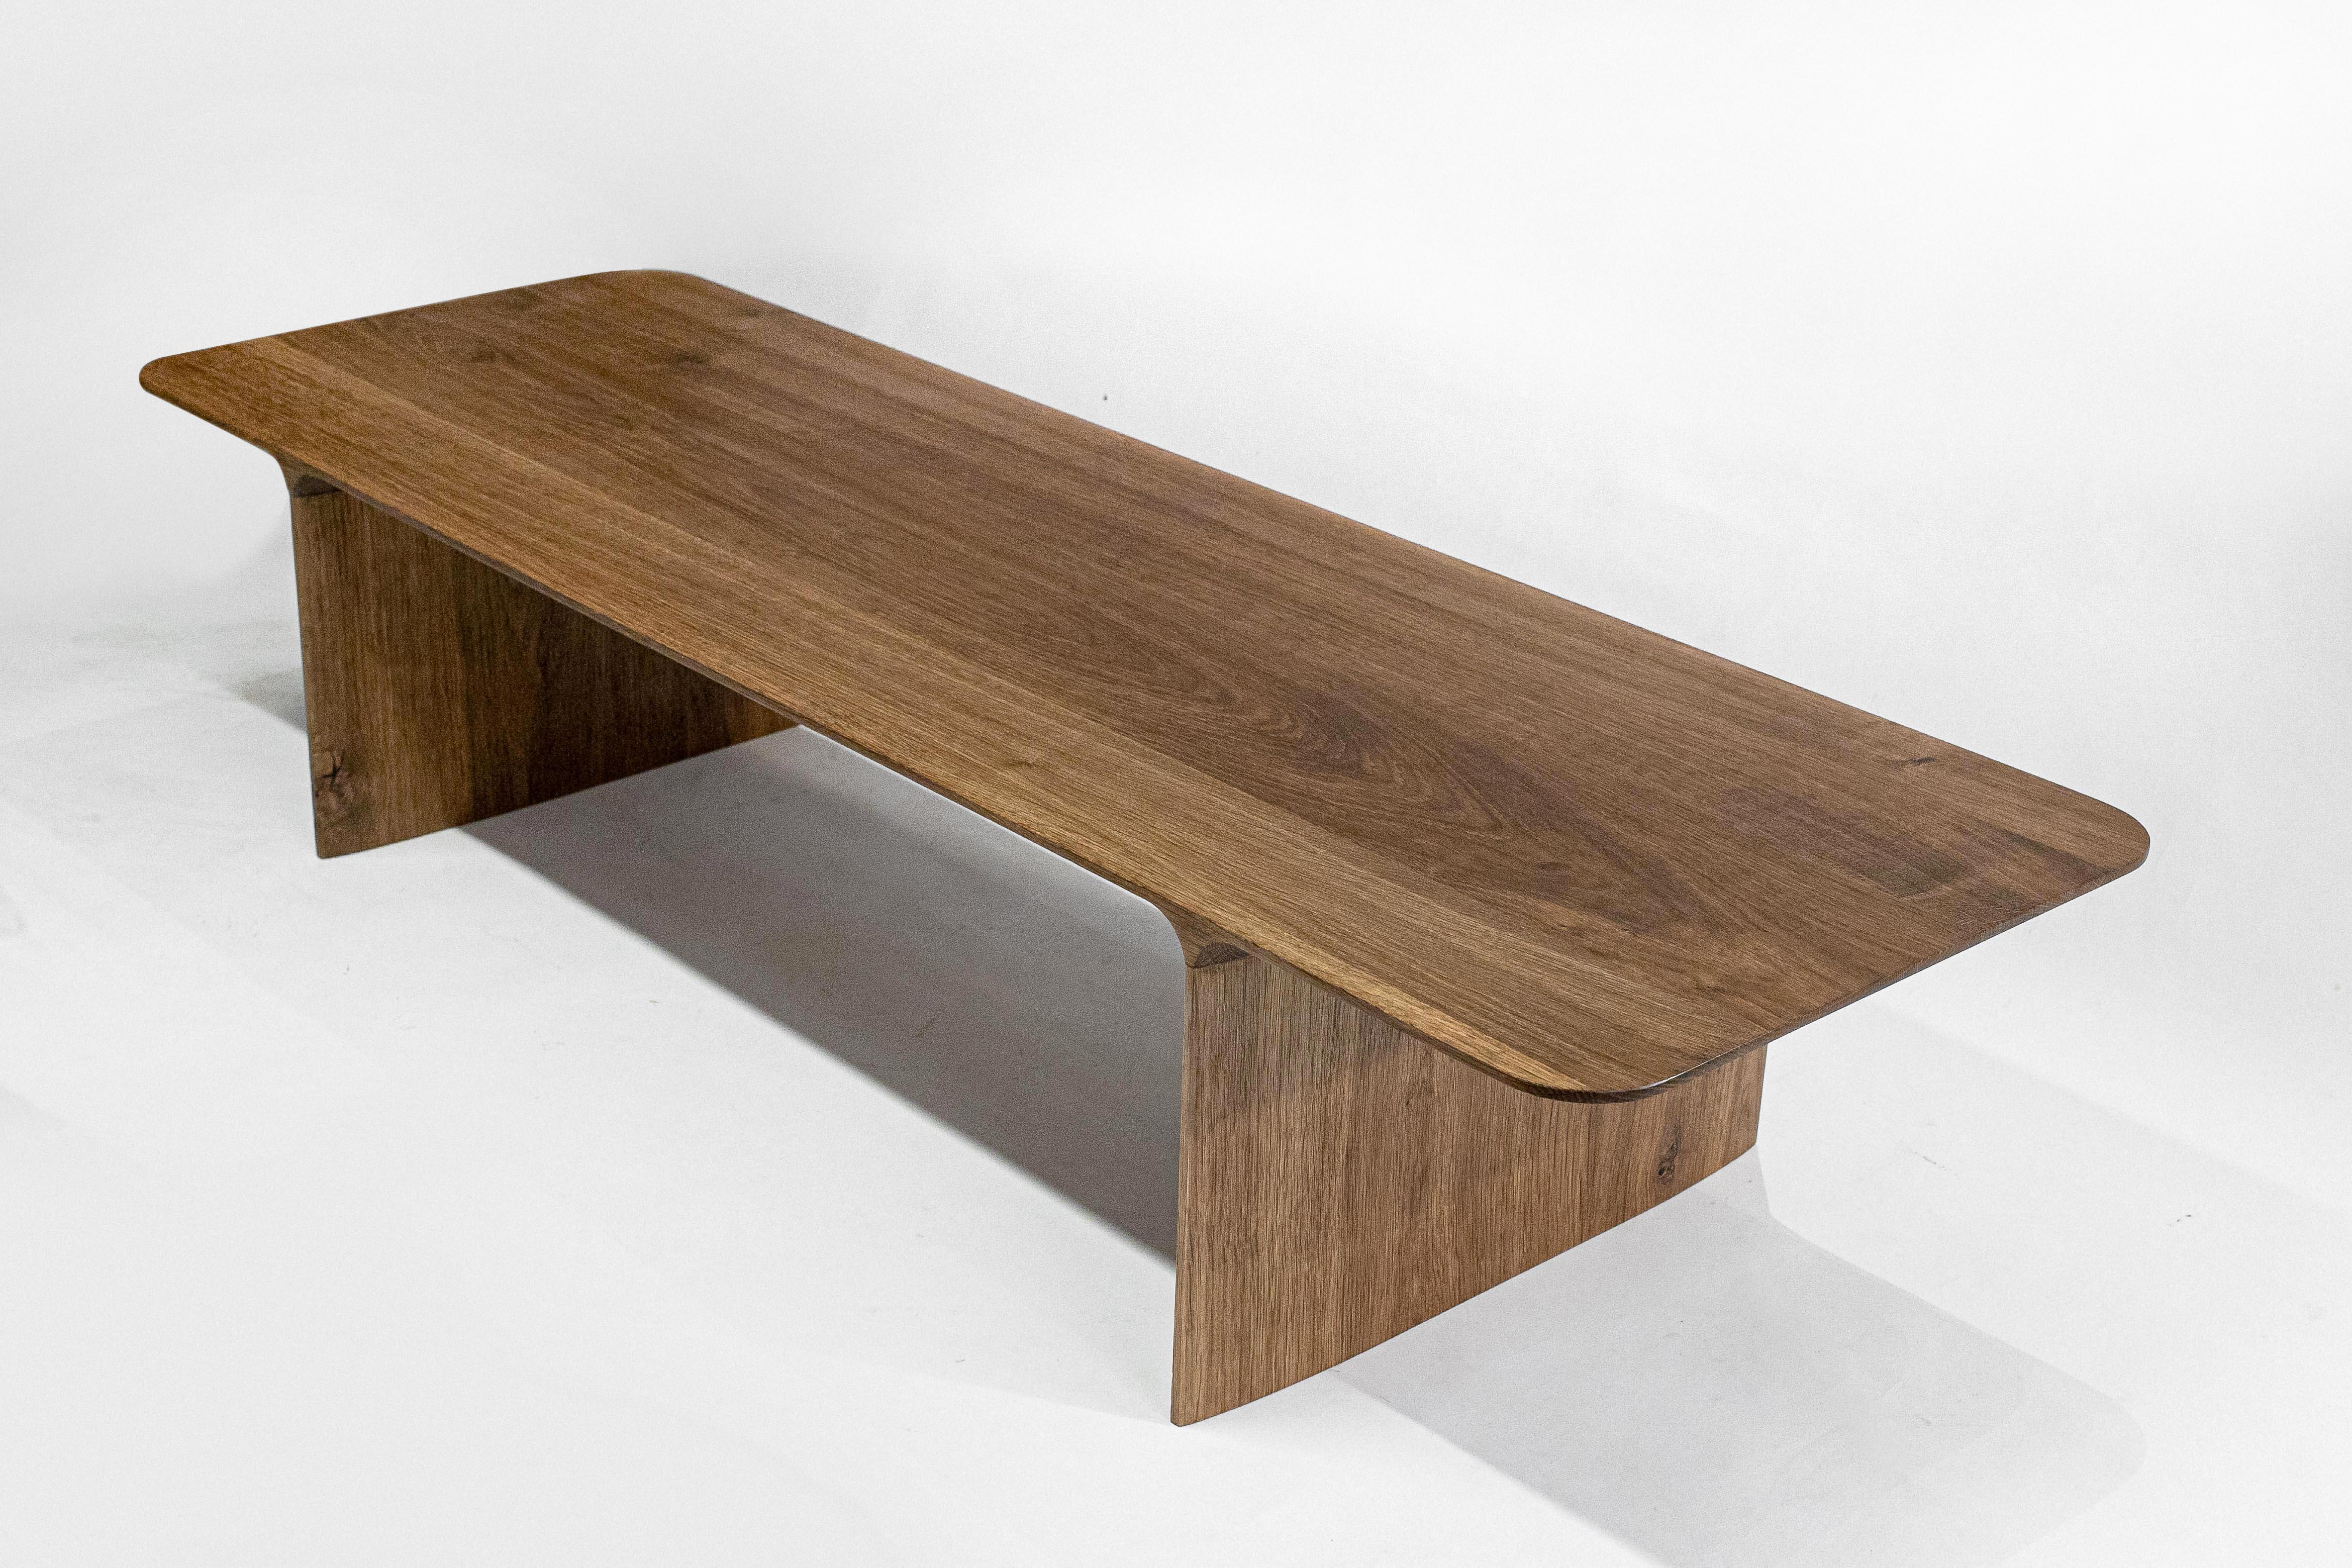 Shave oak and nut fall coffee table by Cedric Breisacher
Dimensions: L 180 x L 60 x H 35 cm
Materials: Oak, nut fall

Designer-sculptor, Cedric Breisacher has an atypical path. Self-taught man, he followed during five years an Industrial class